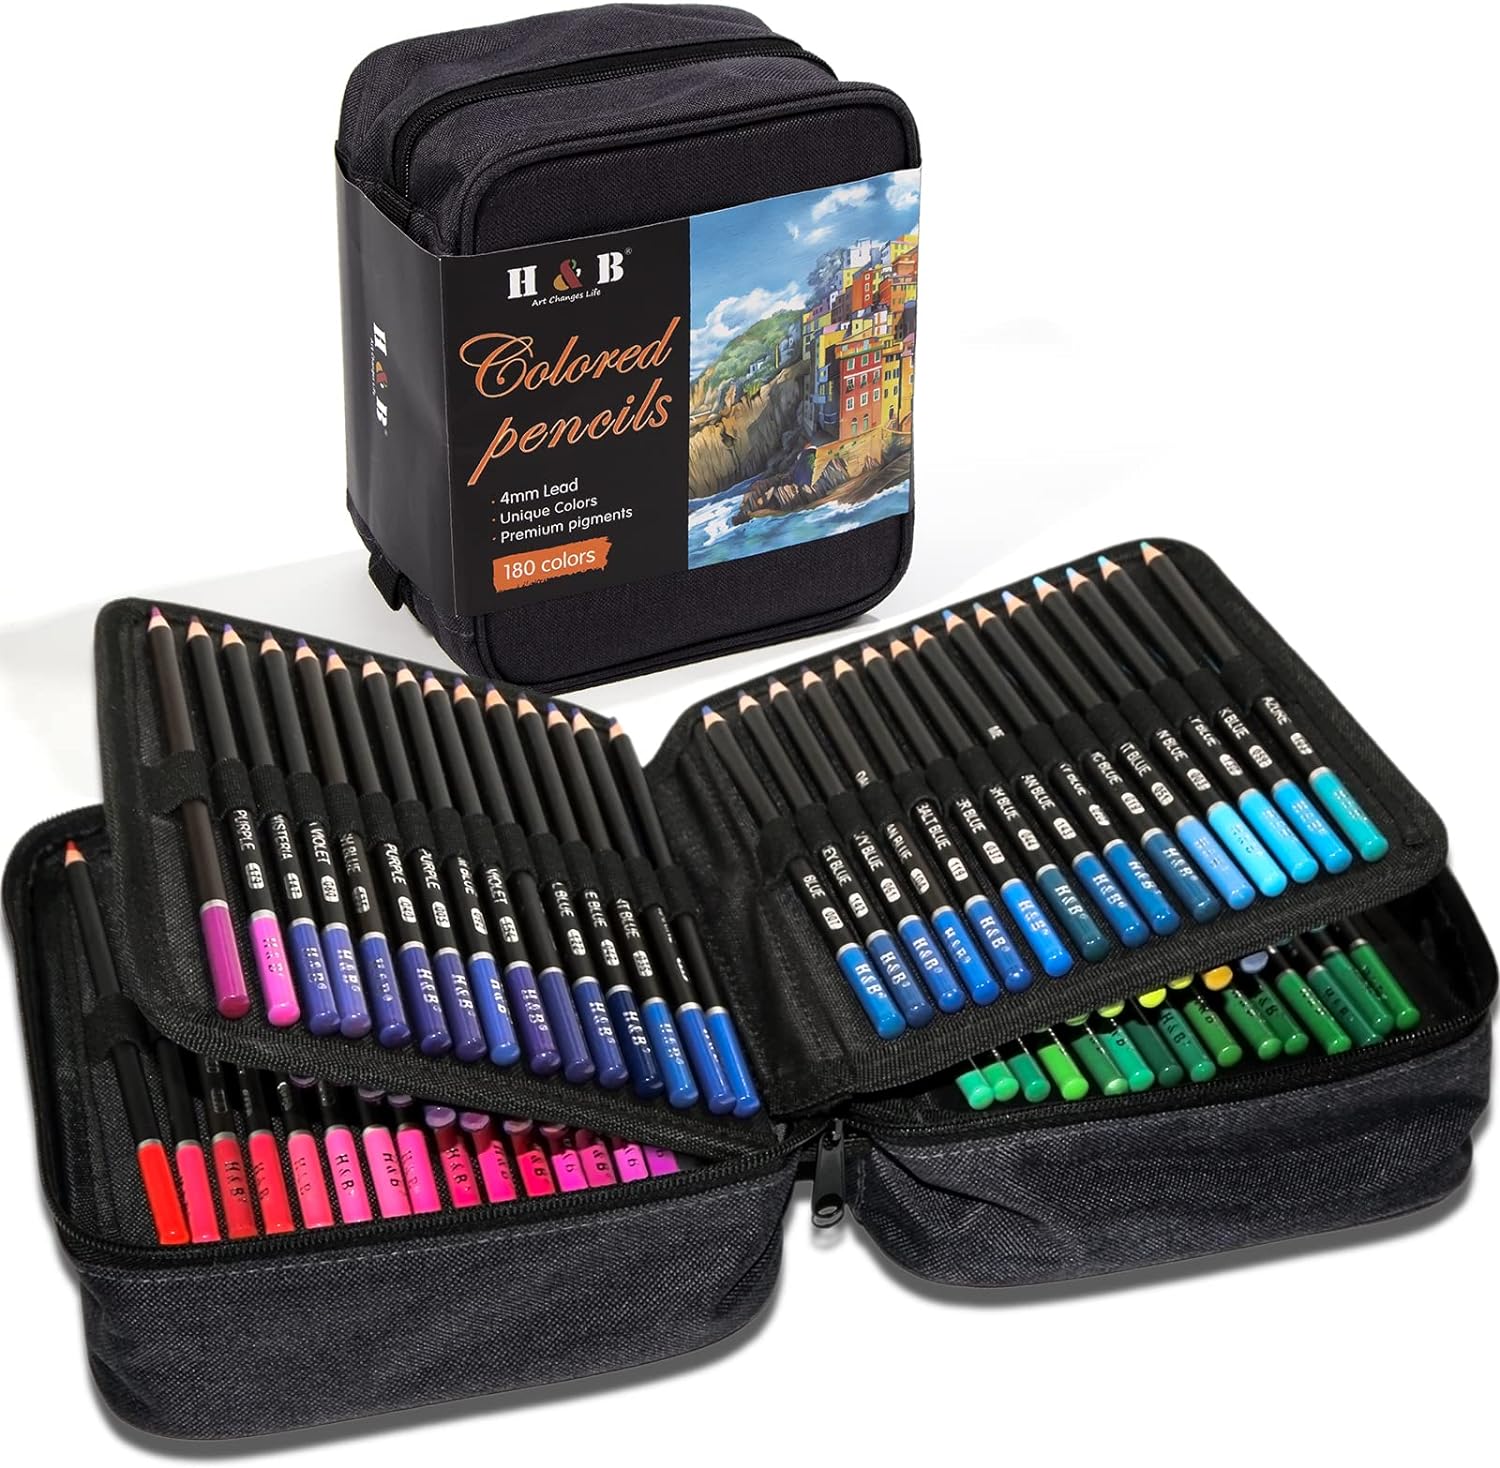 H&B 180 Colored Pencils Kit Oil Based with Zipper Storage Case